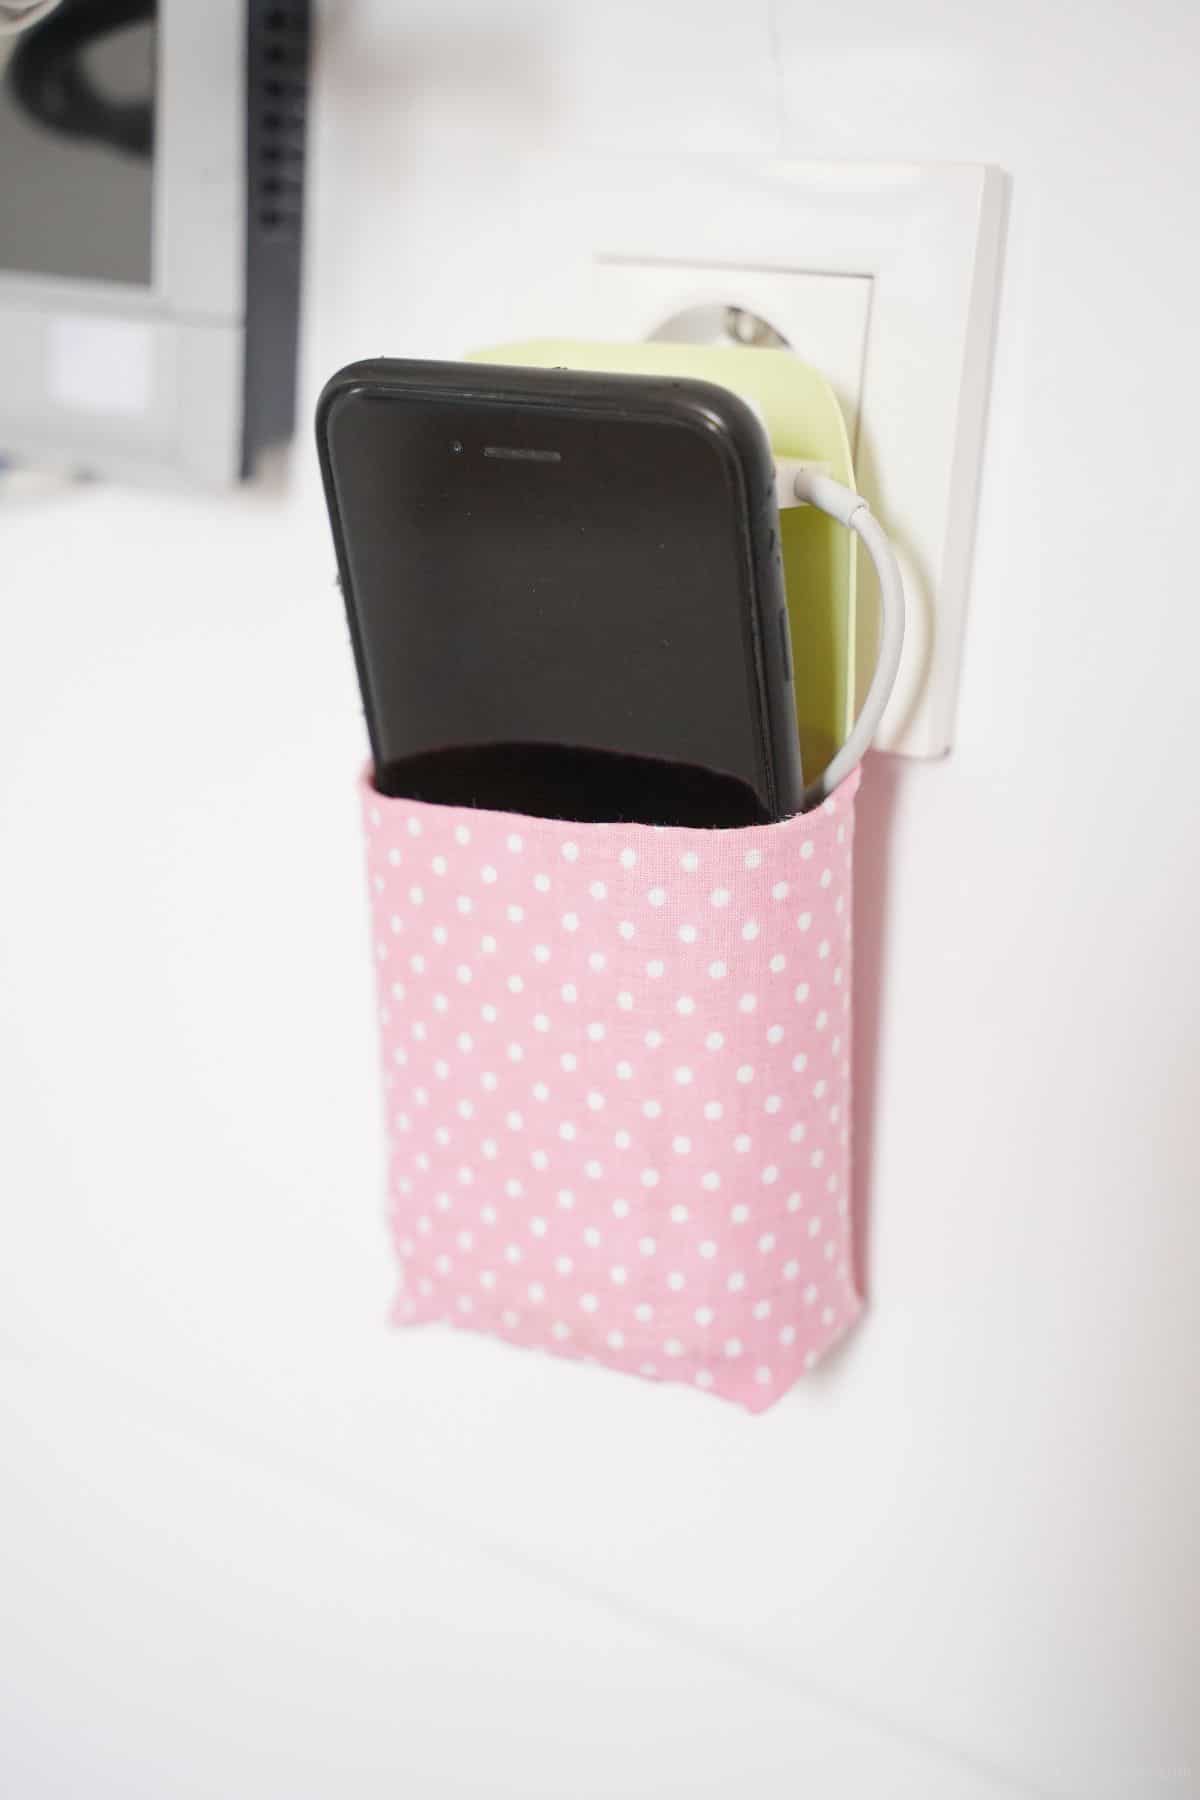 white and pink holder for cellphone hanging on white outlet